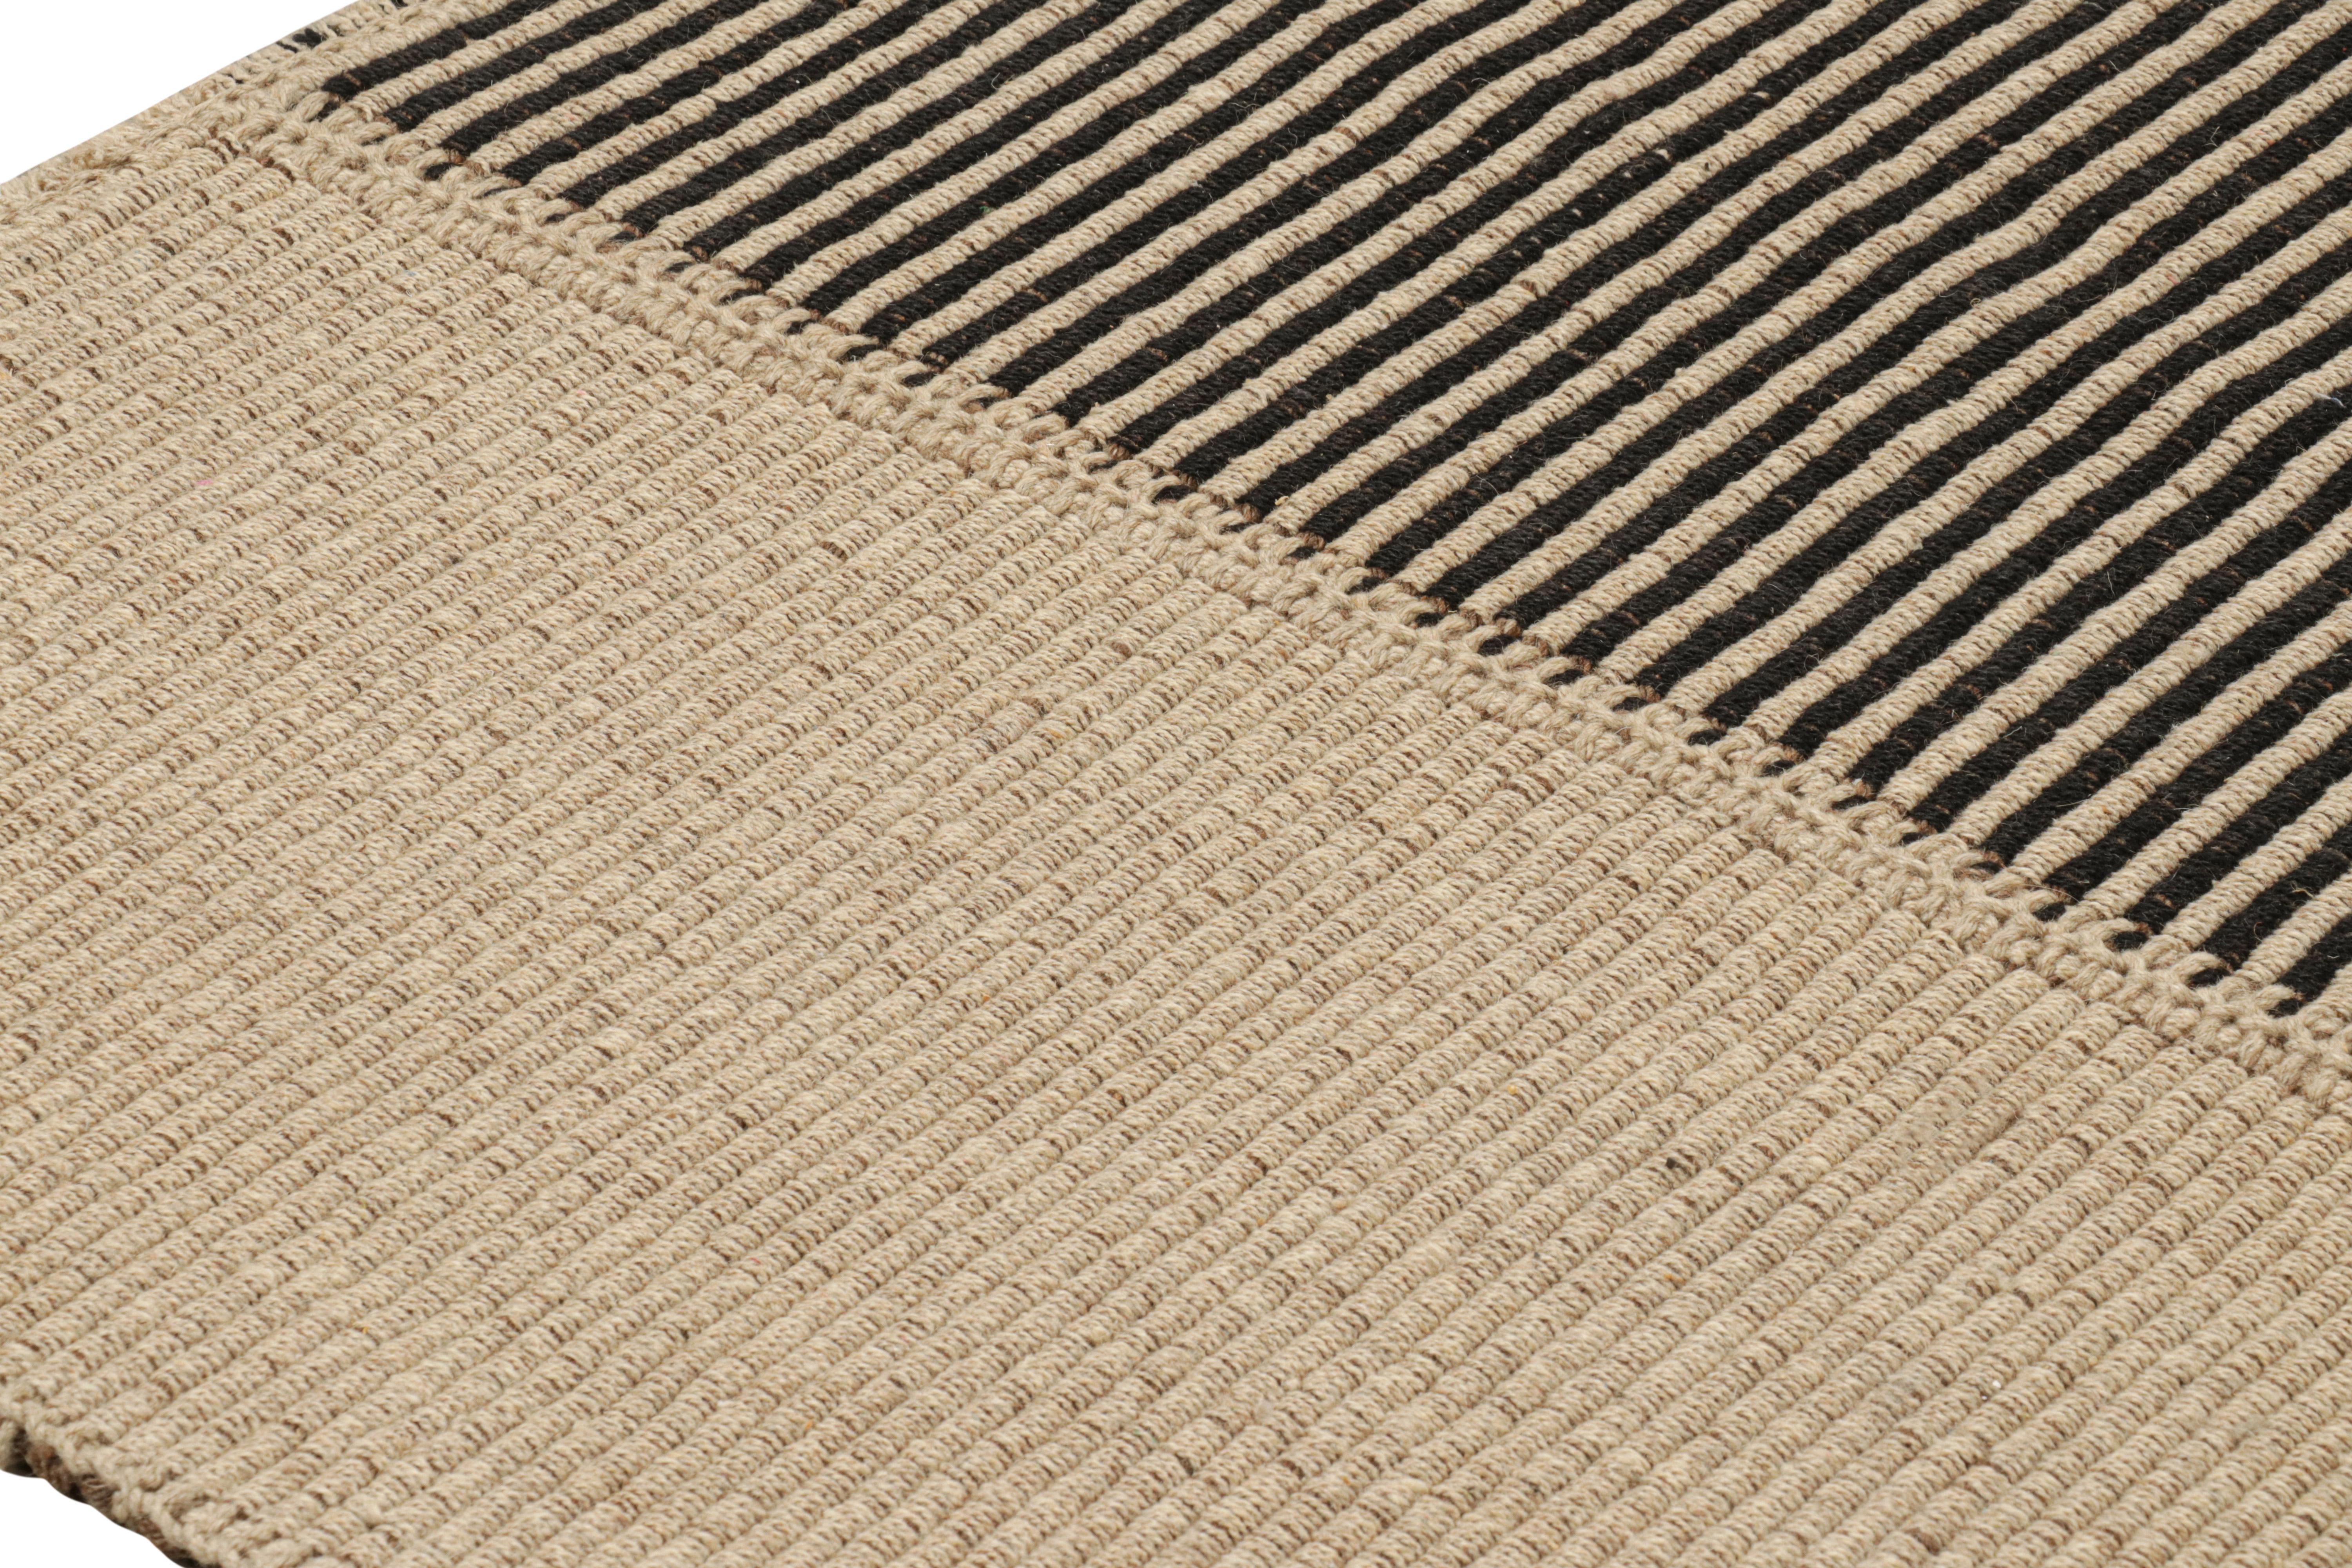 Rug & Kilim’s Contemporary Kilim in Black and Beige Textural Stripes  In New Condition For Sale In Long Island City, NY